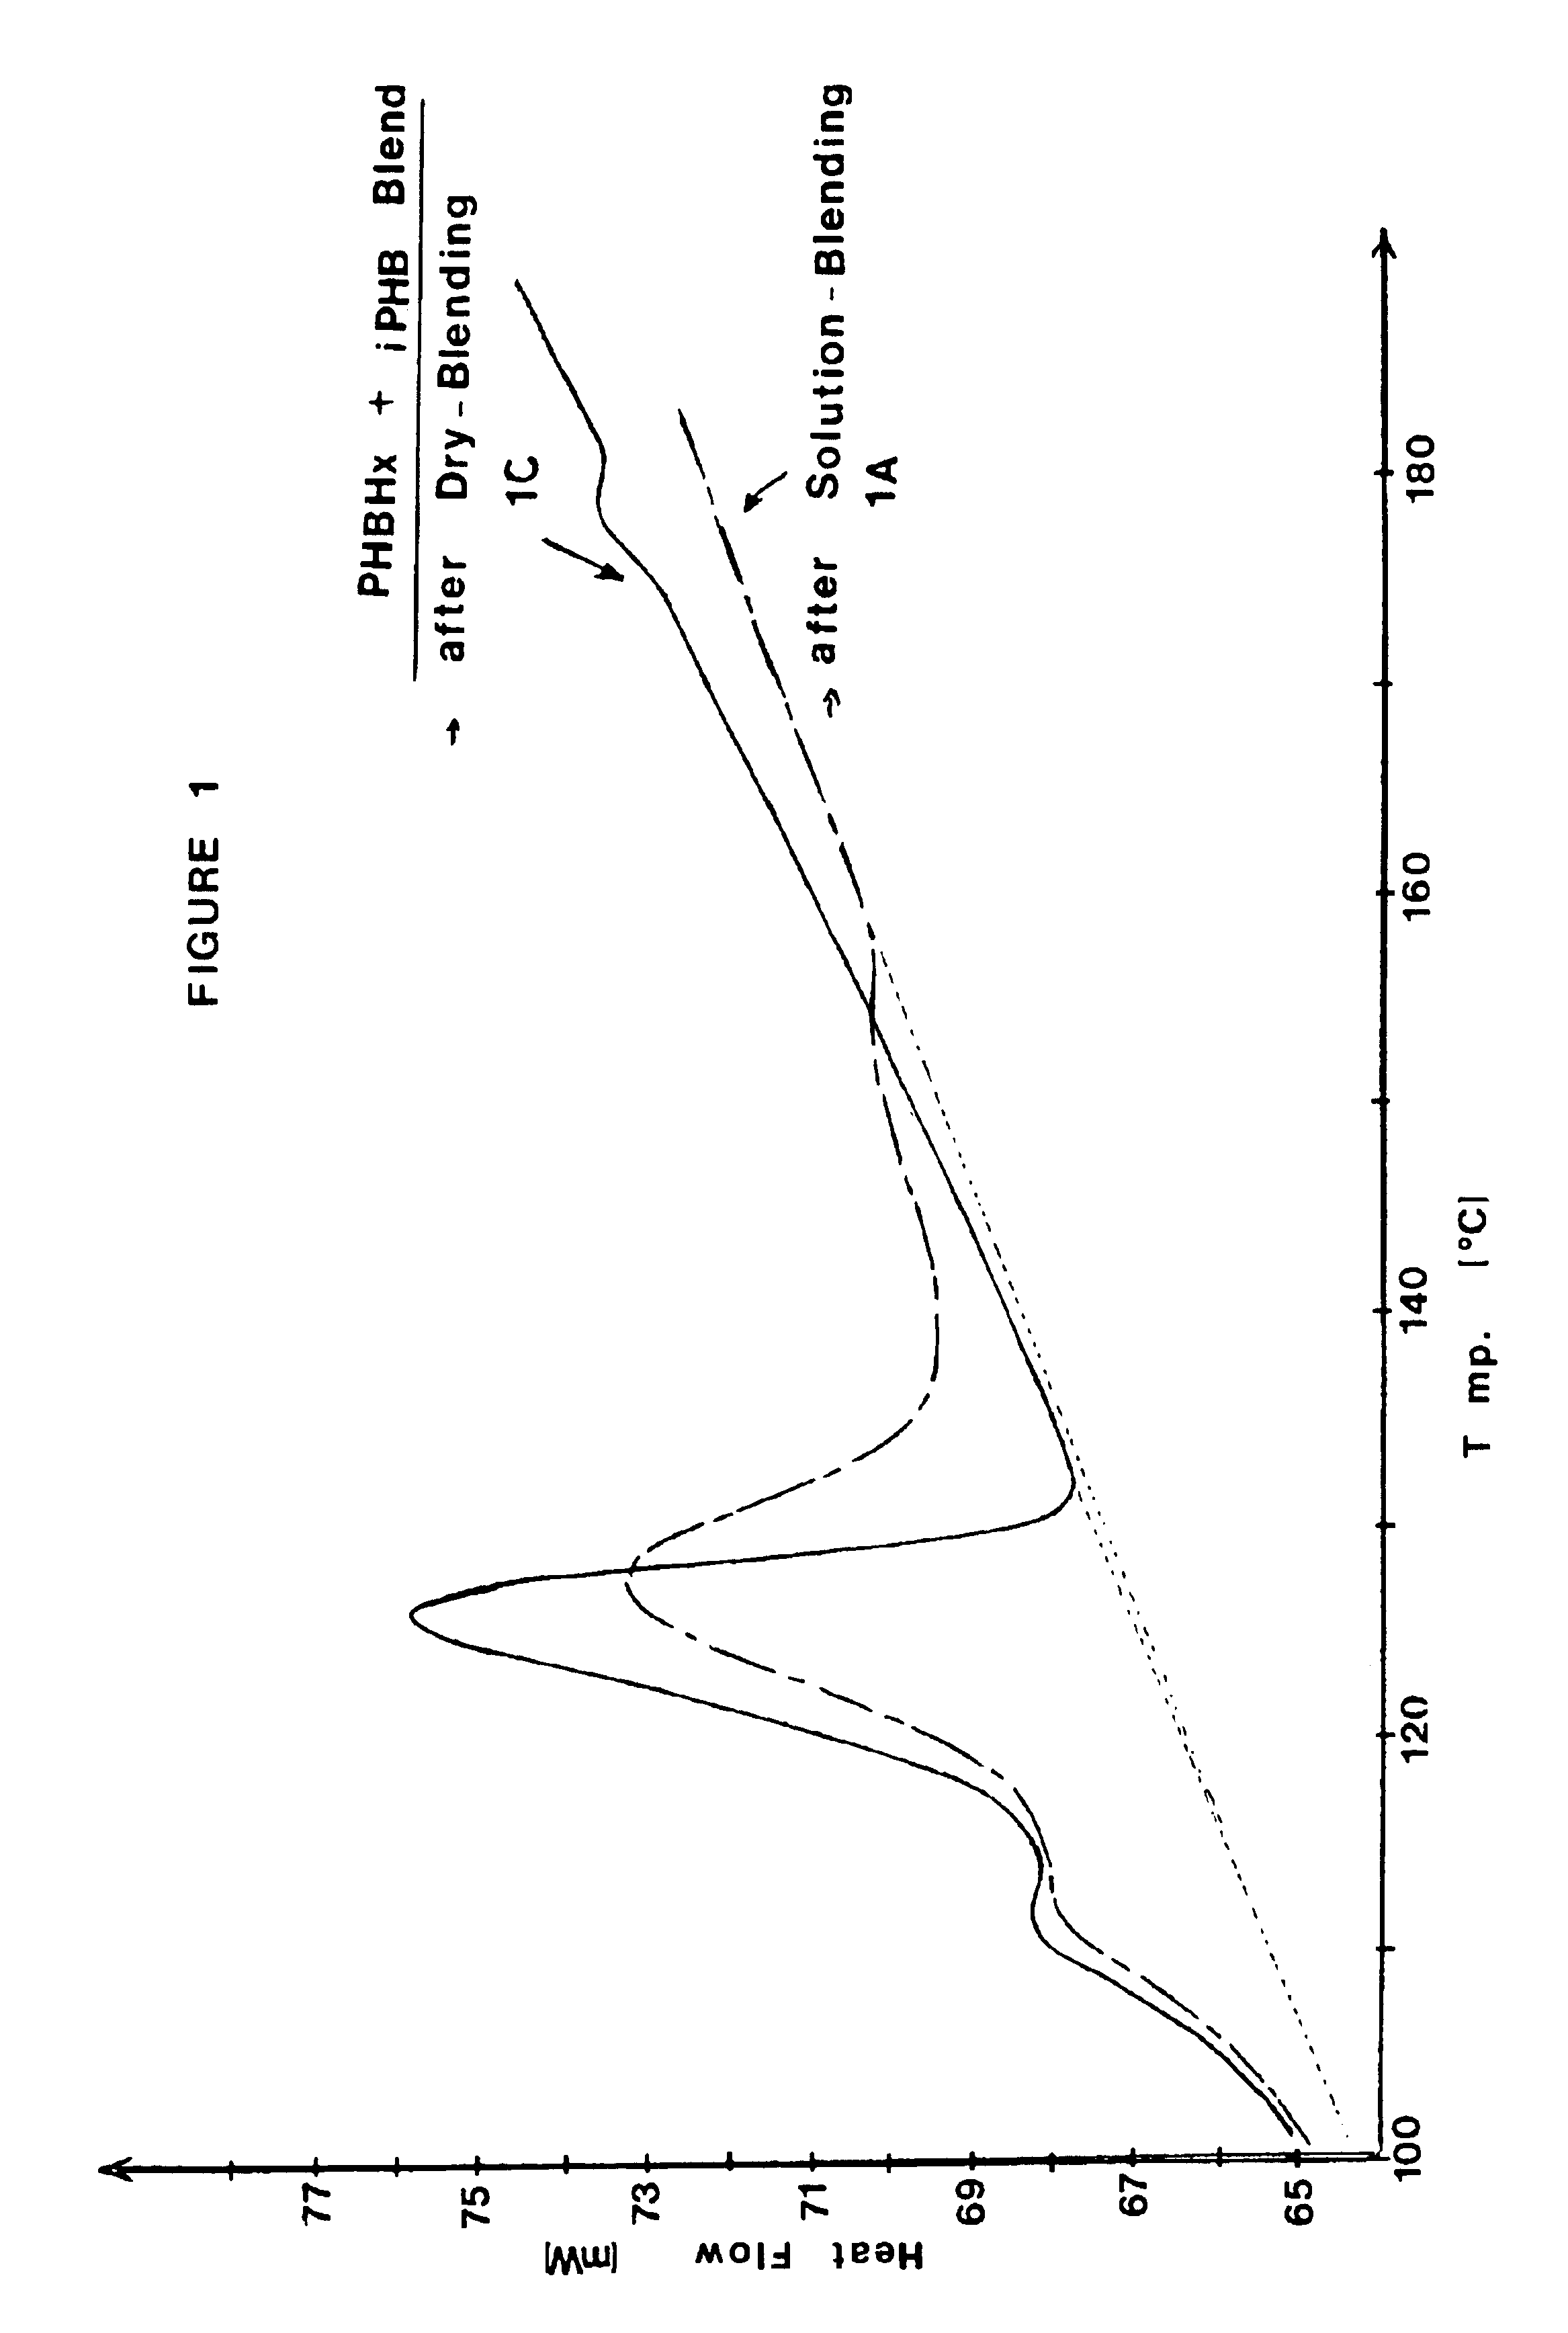 Method for making biodegradable polyhydroxyalkanoate copolymers having improved crystallization properties